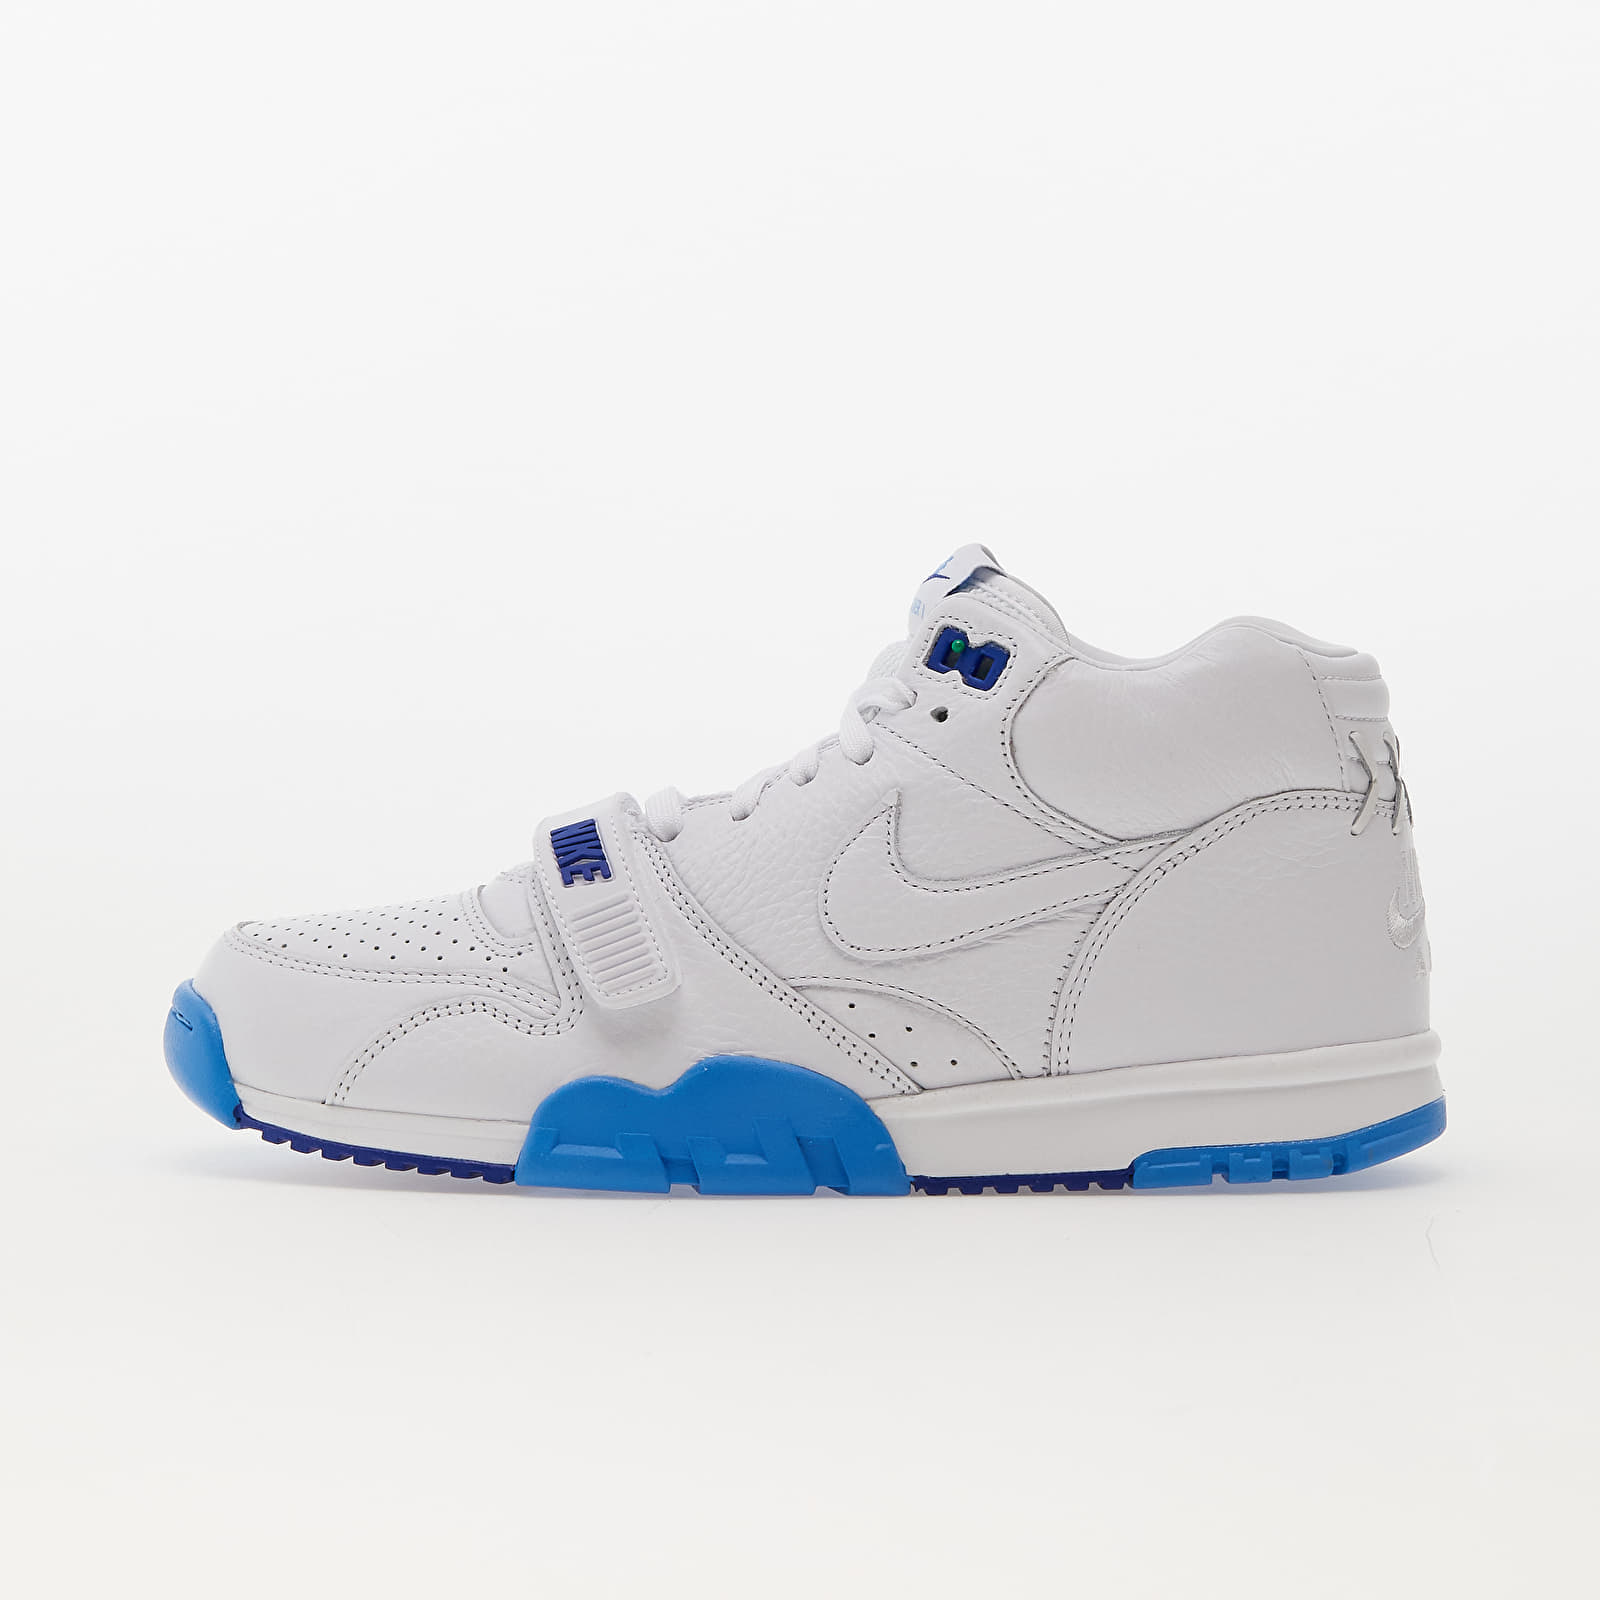 Men's sneakers and shoes Nike Air Trainer 1 White/ White-University Blue-Old Royal